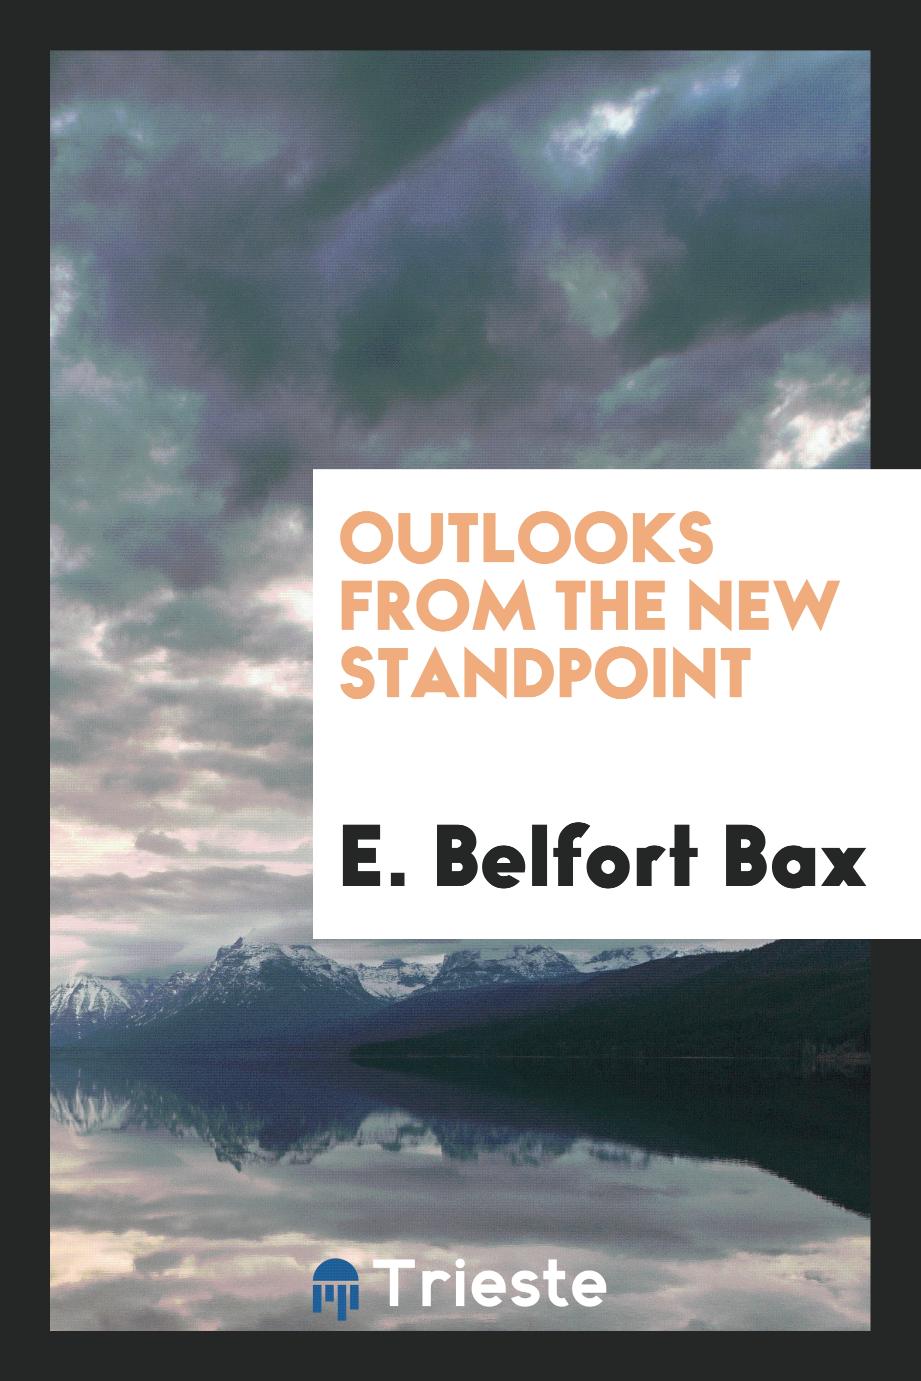 Outlooks from the new standpoint